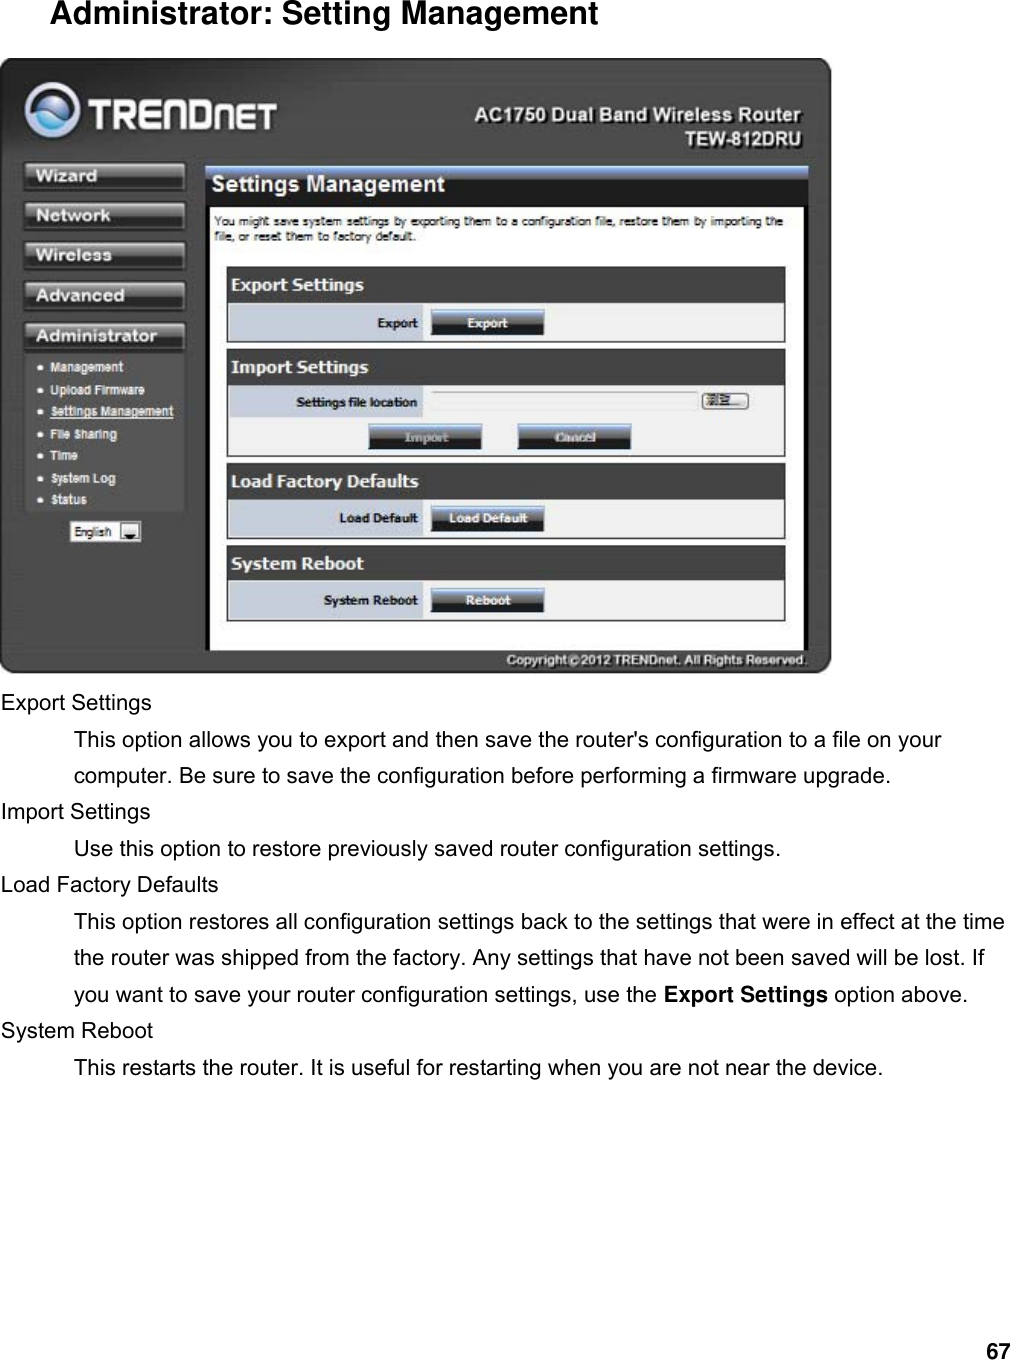 67 Administrator: Setting Management  Export Settings   This option allows you to export and then save the router&apos;s configuration to a file on your computer. Be sure to save the configuration before performing a firmware upgrade.   Import Settings   Use this option to restore previously saved router configuration settings.   Load Factory Defaults   This option restores all configuration settings back to the settings that were in effect at the time the router was shipped from the factory. Any settings that have not been saved will be lost. If you want to save your router configuration settings, use the Export Settings option above.   System Reboot   This restarts the router. It is useful for restarting when you are not near the device.   